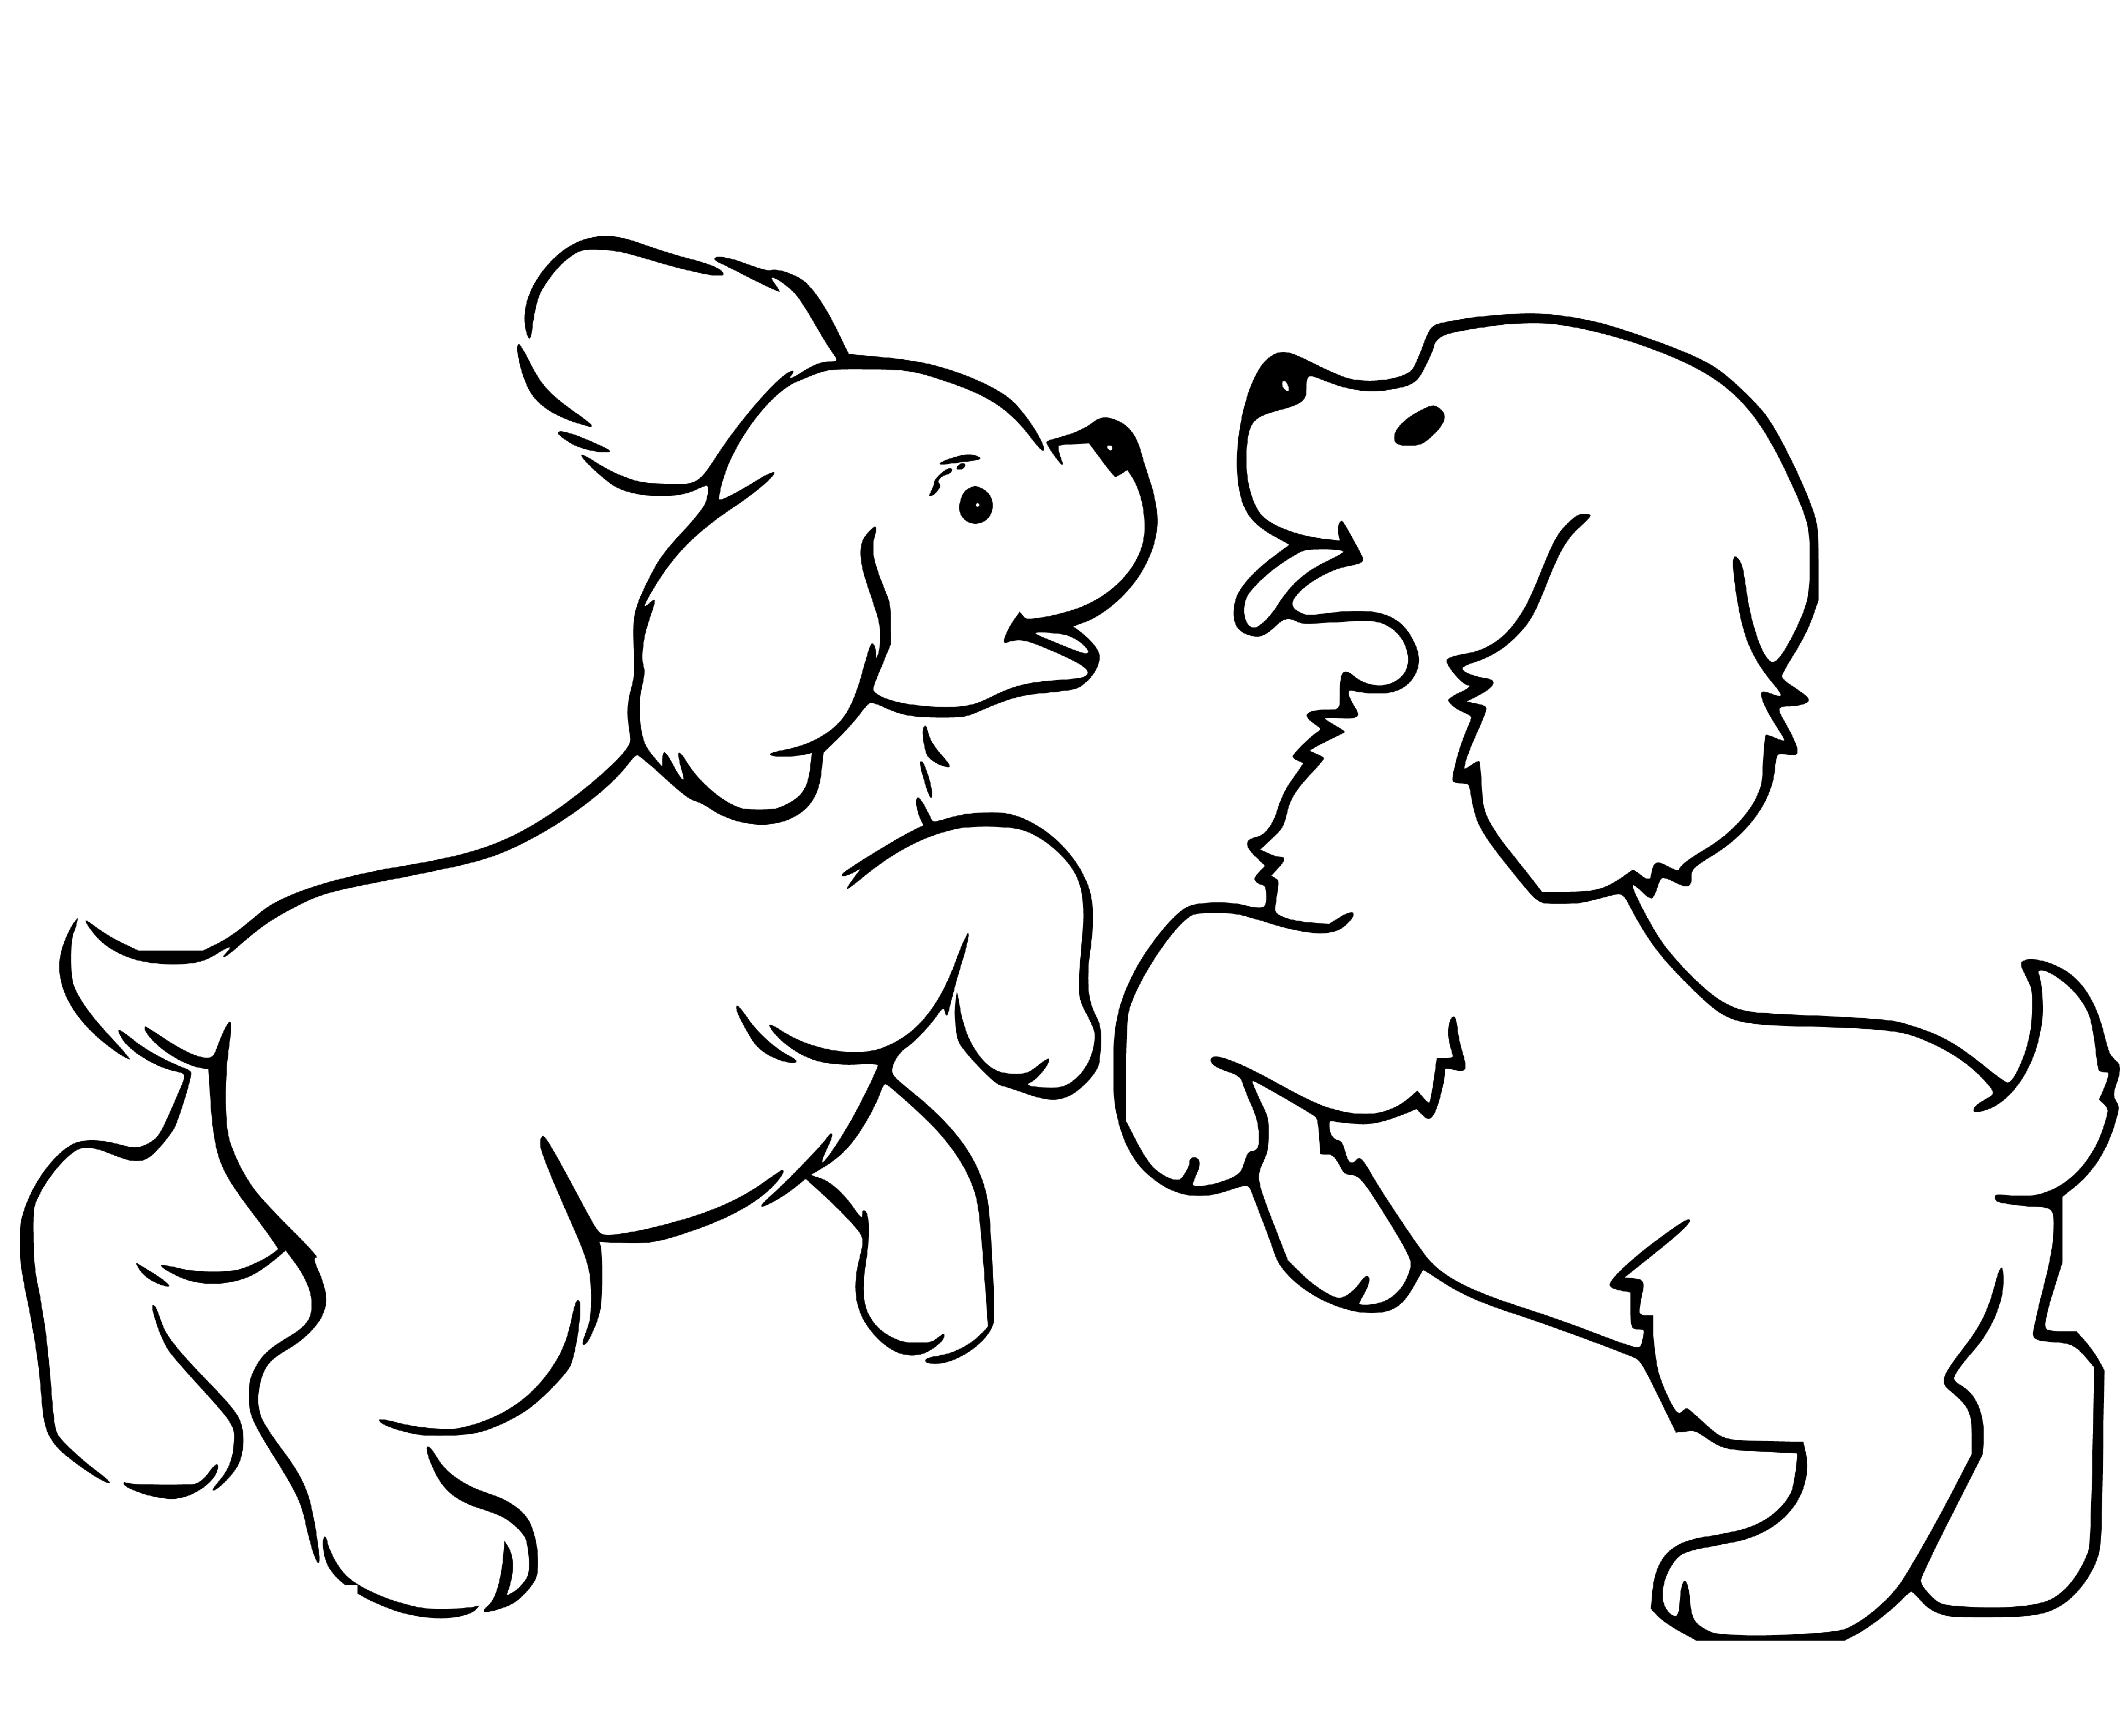 Printable Puppies playing Coloring Page for kids.